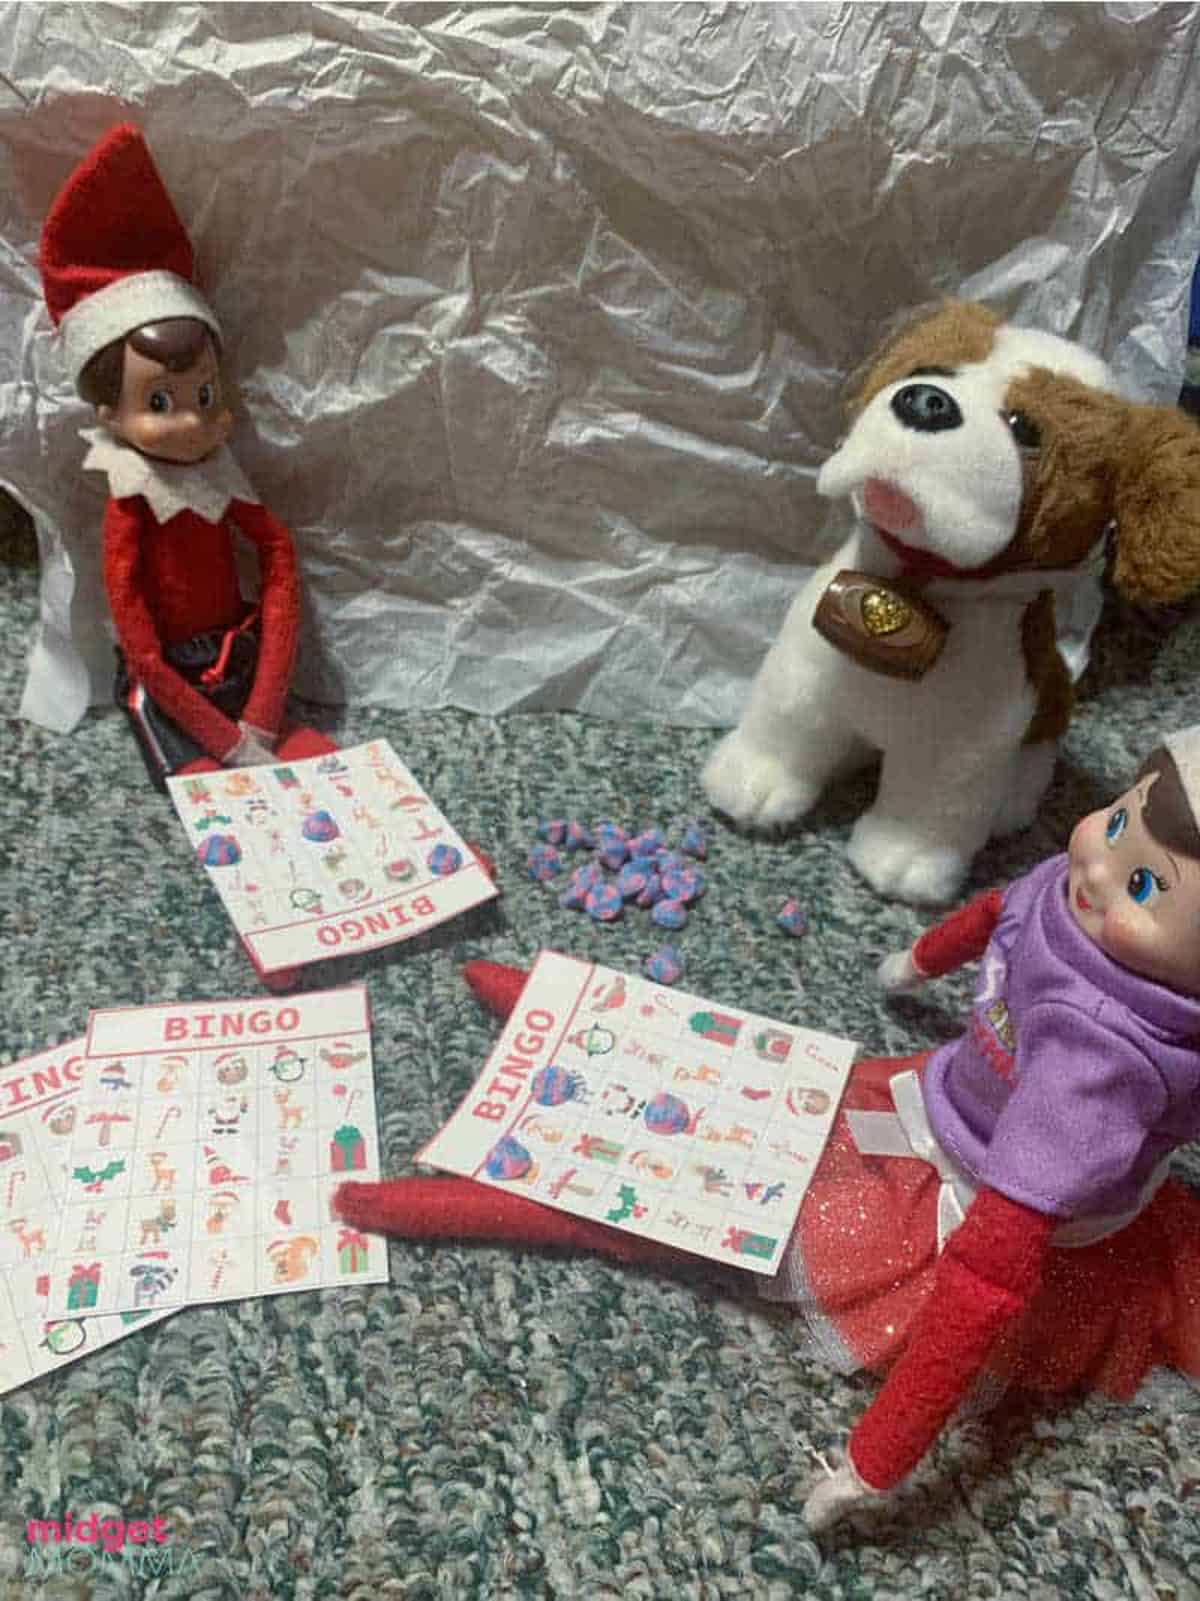 An elf on the shelf with two dolls and a dog.